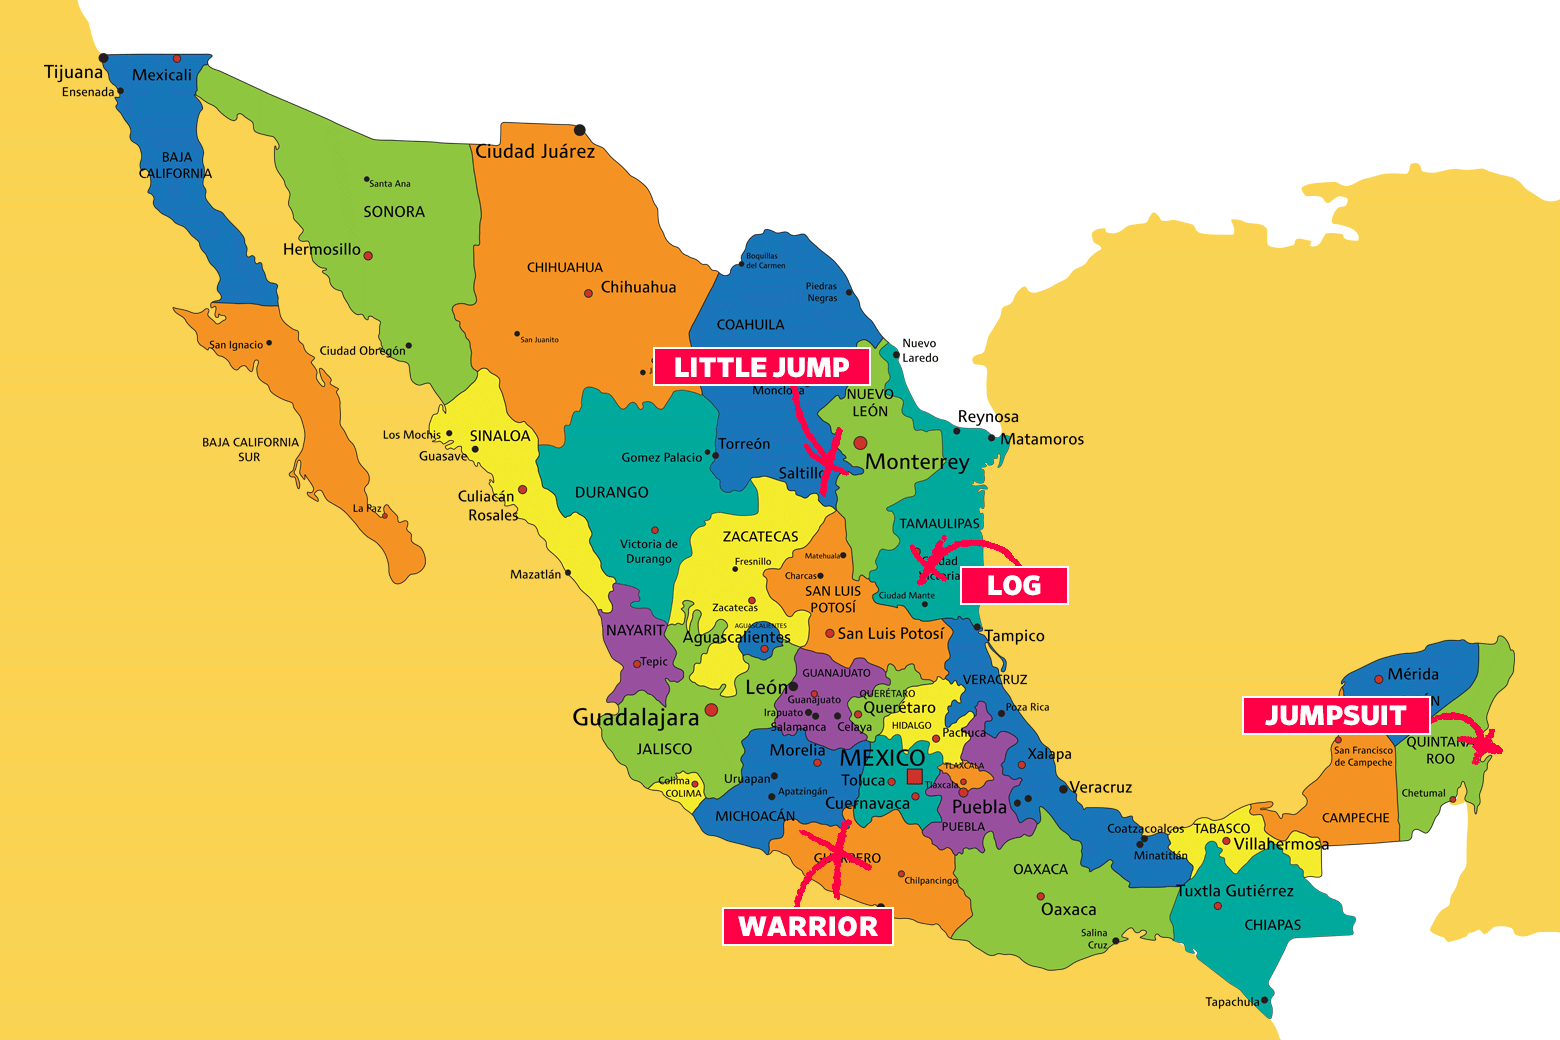 Map of Mexico with city names erroneously translated as Little Jump, Log, Jumpsuit, and Warrior